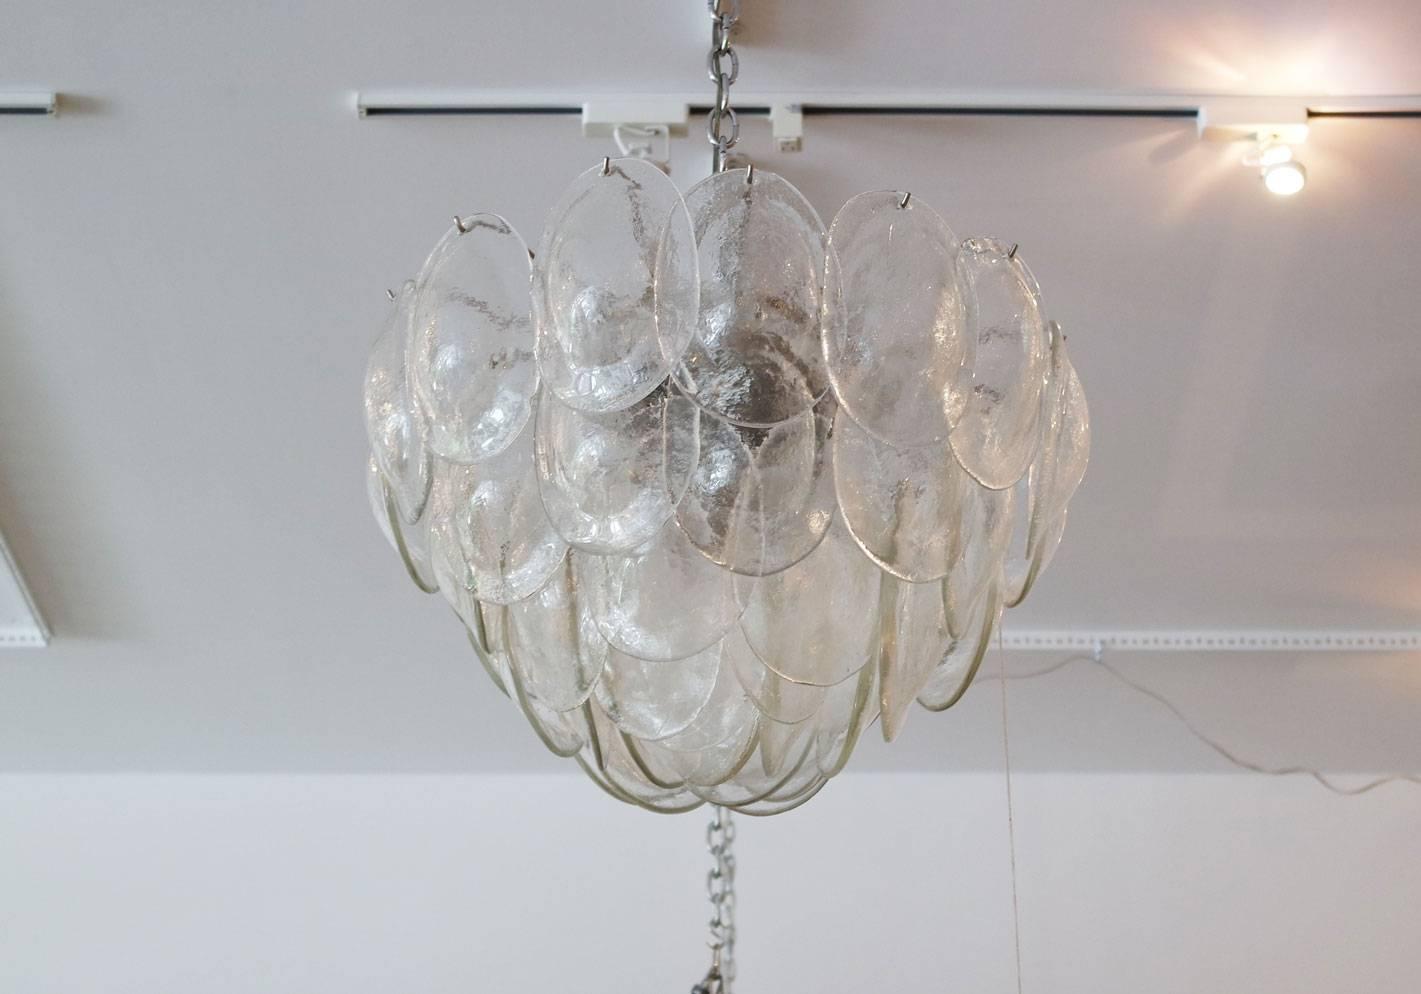 Large five-tiered Vistosi chandelier with turtle-back glass pieces. The armature is chrome and there are six candelabra sockets.